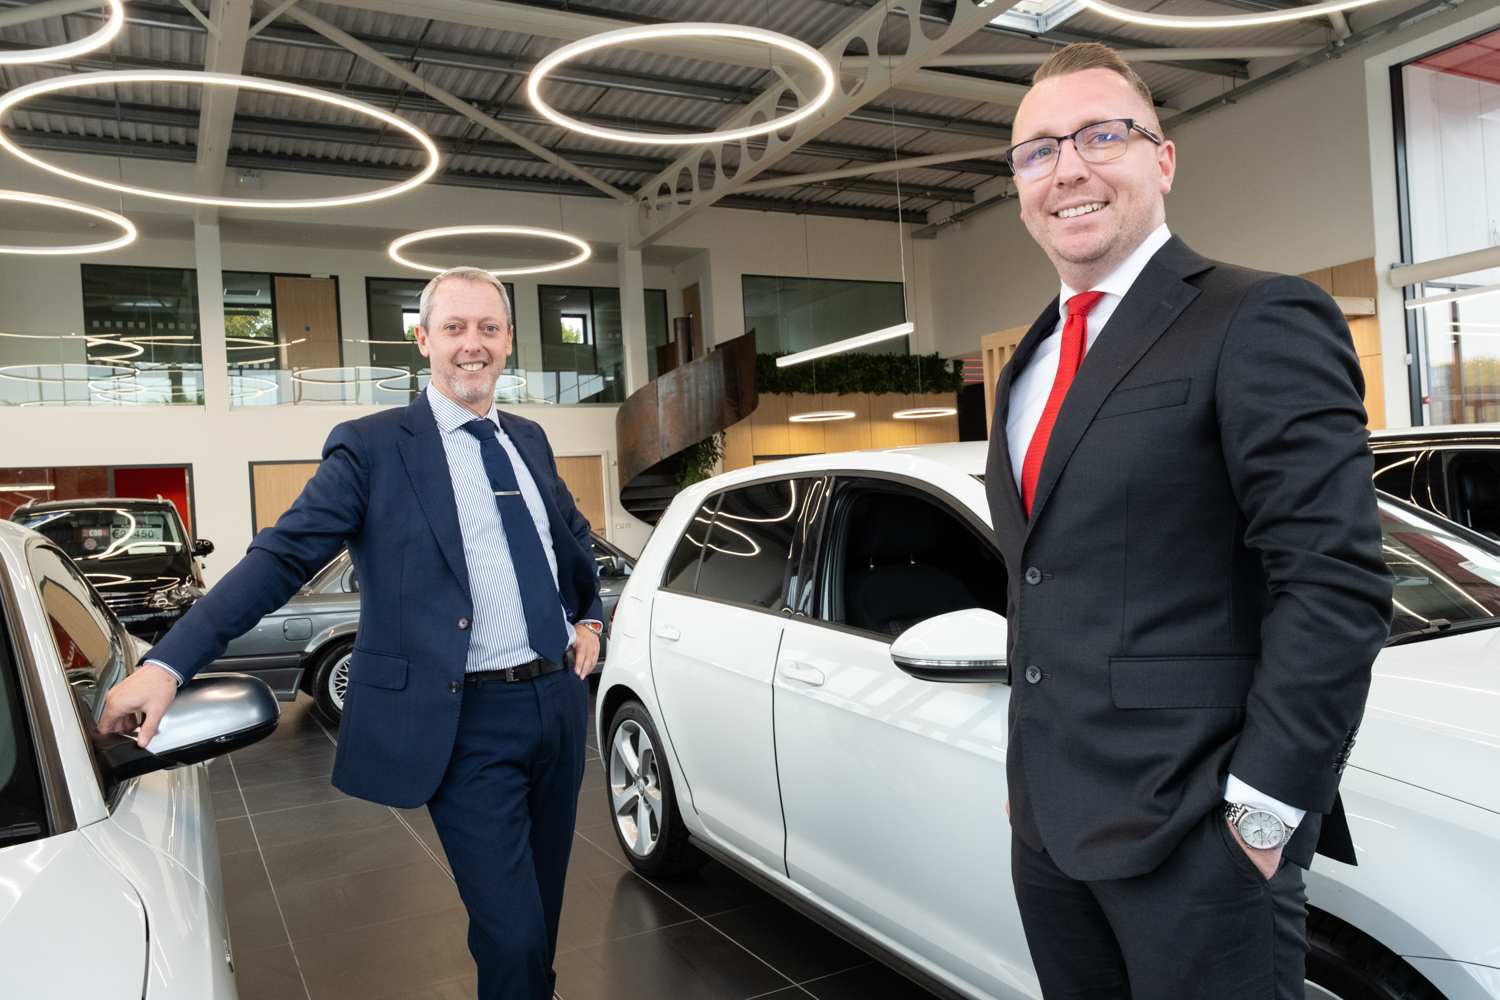 Car Industry News | Kylemore Cars embraces eco future | CompleteCar.ie